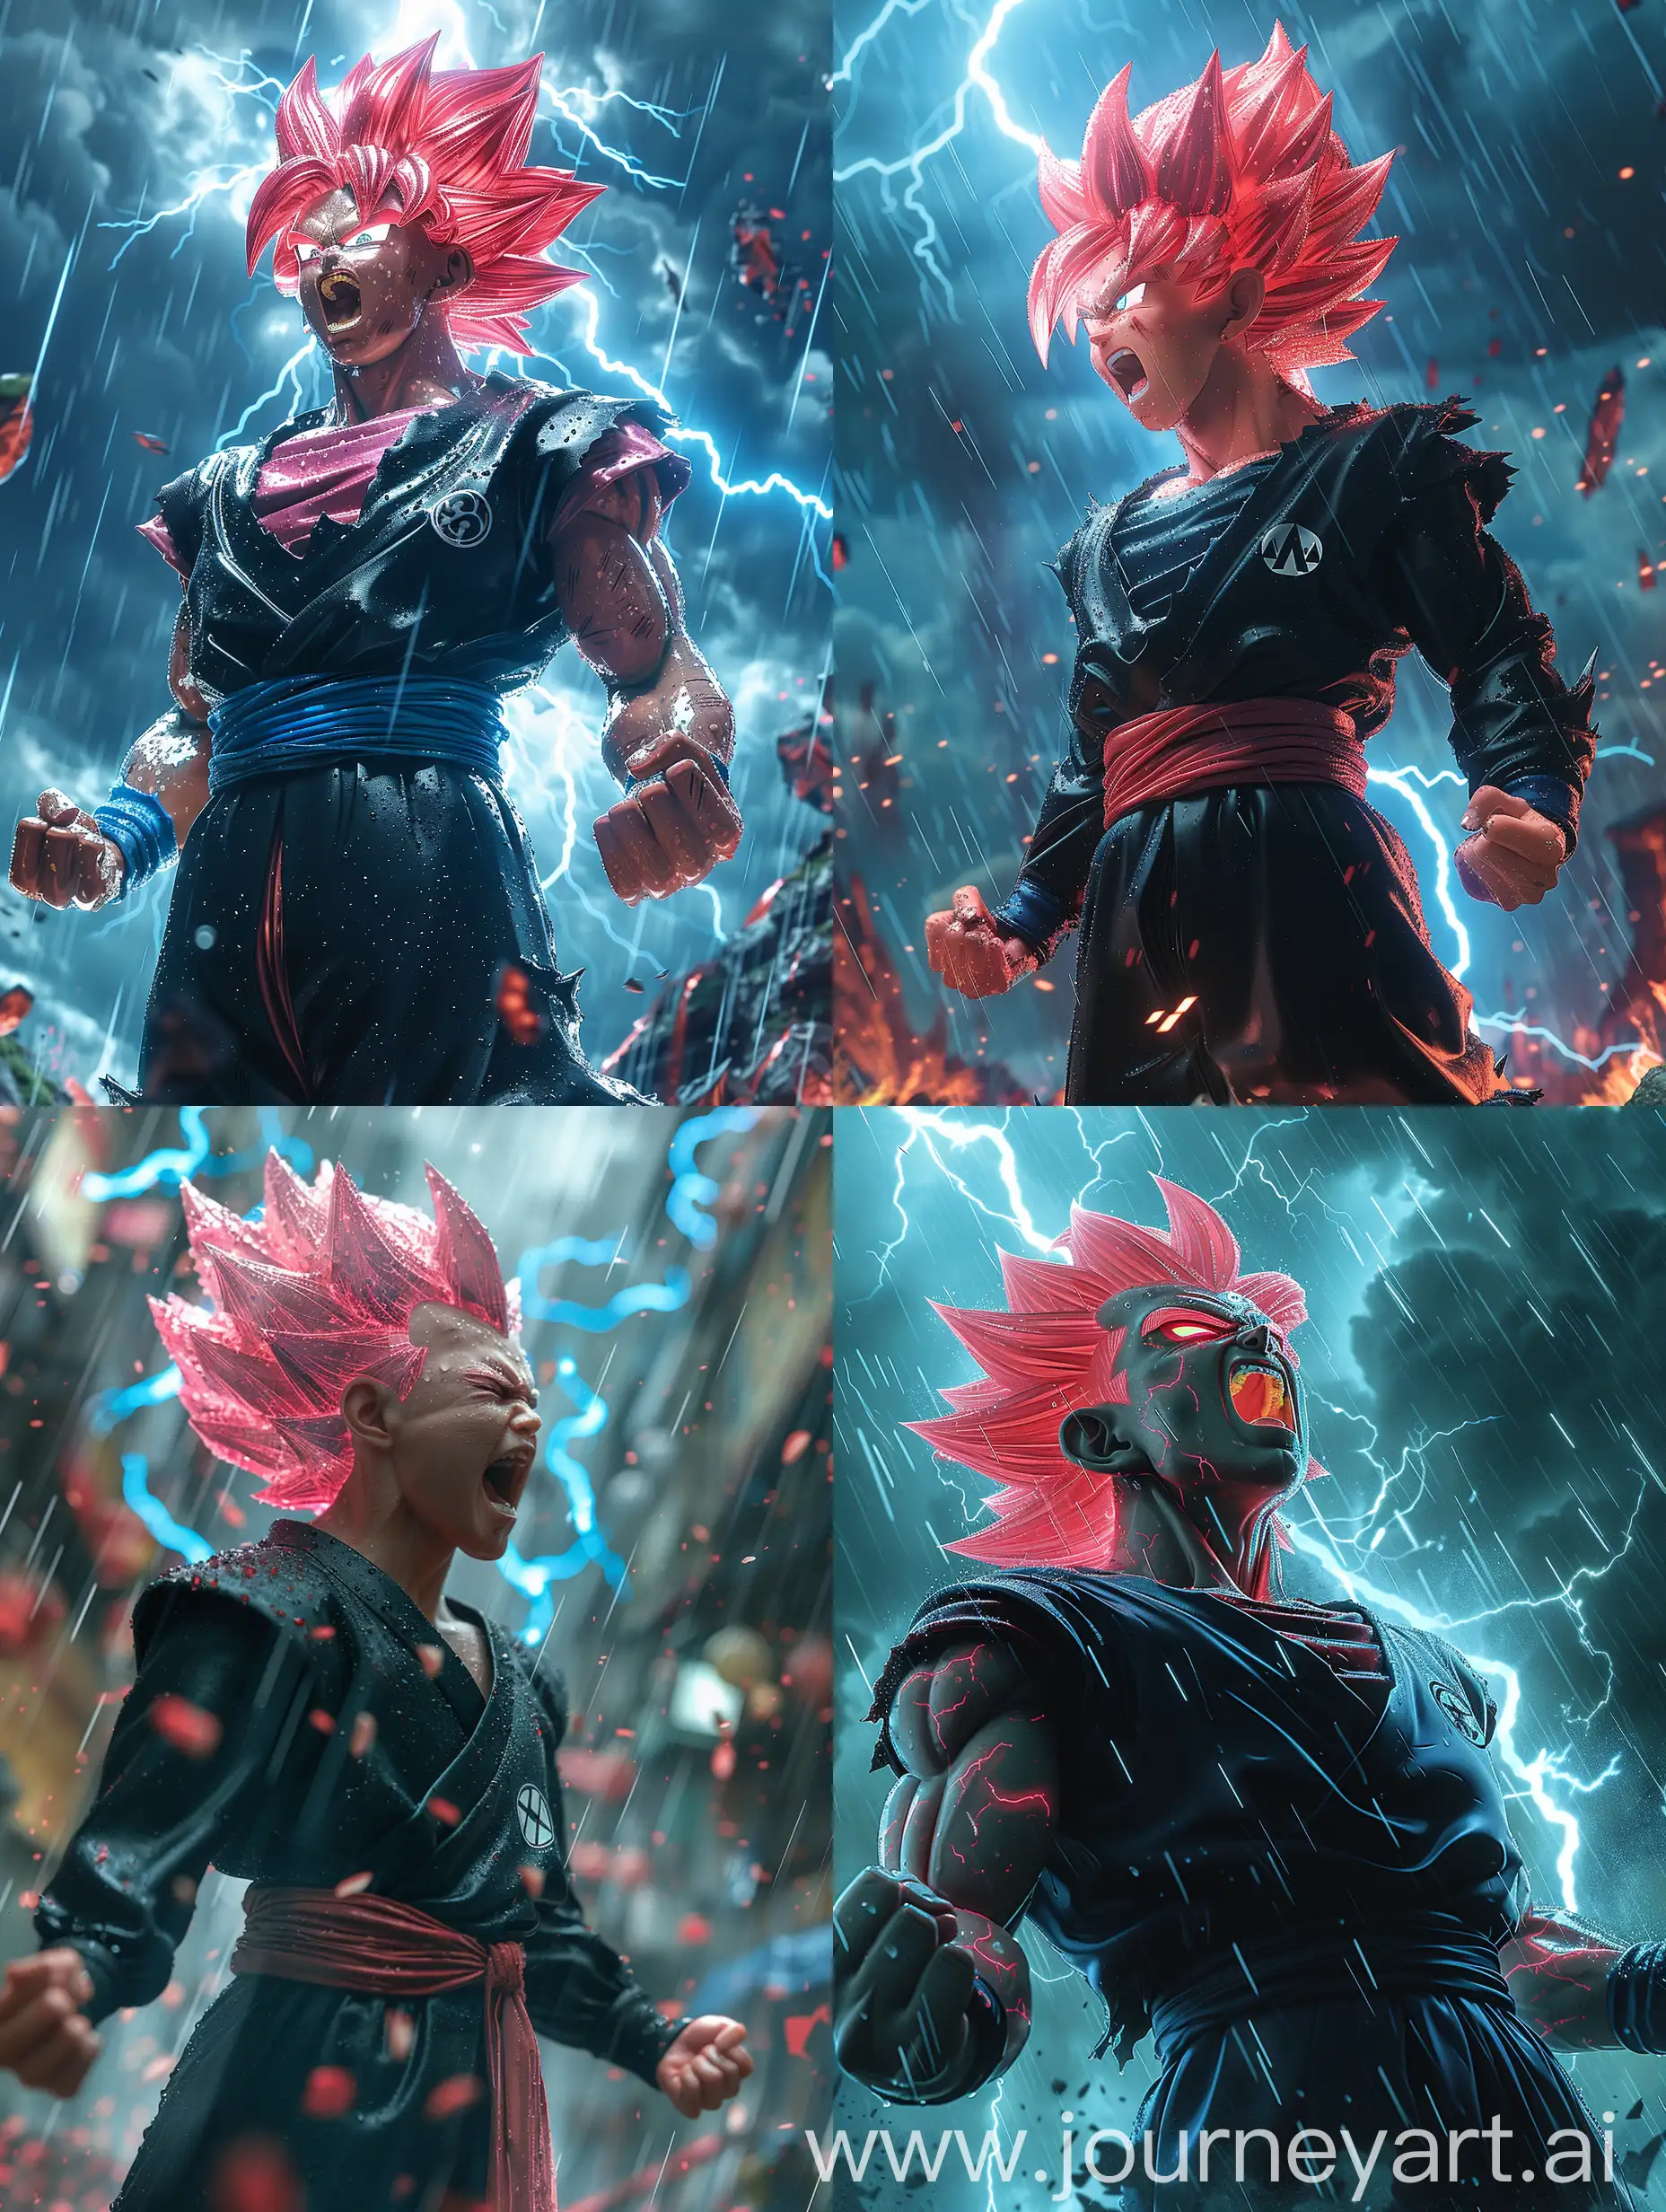 Real full body portrait of real Goku black super saiyan rose with rose hair and black
outfit in fighting pose, by Rudy Siswanto, , fully defined facial features of Goku black super saiyan rose, mouth open, neon aura, blue neon lightnings and thunders, clouds tearing apart, ground shattering, ethereal portraiture, tonalist, color scheme, pensive stillness, dark aquamarine and red, rainy night, ray tracing, high reflection, dramatic lighting, intricate details, photo realism, hyperrealism, hyperrealistic photorealistic, 85-mm-lens crispy detail 8k UHD HDR, high key lighting
--ar 4:5 --v 6.0 --style raw --stylize 1000